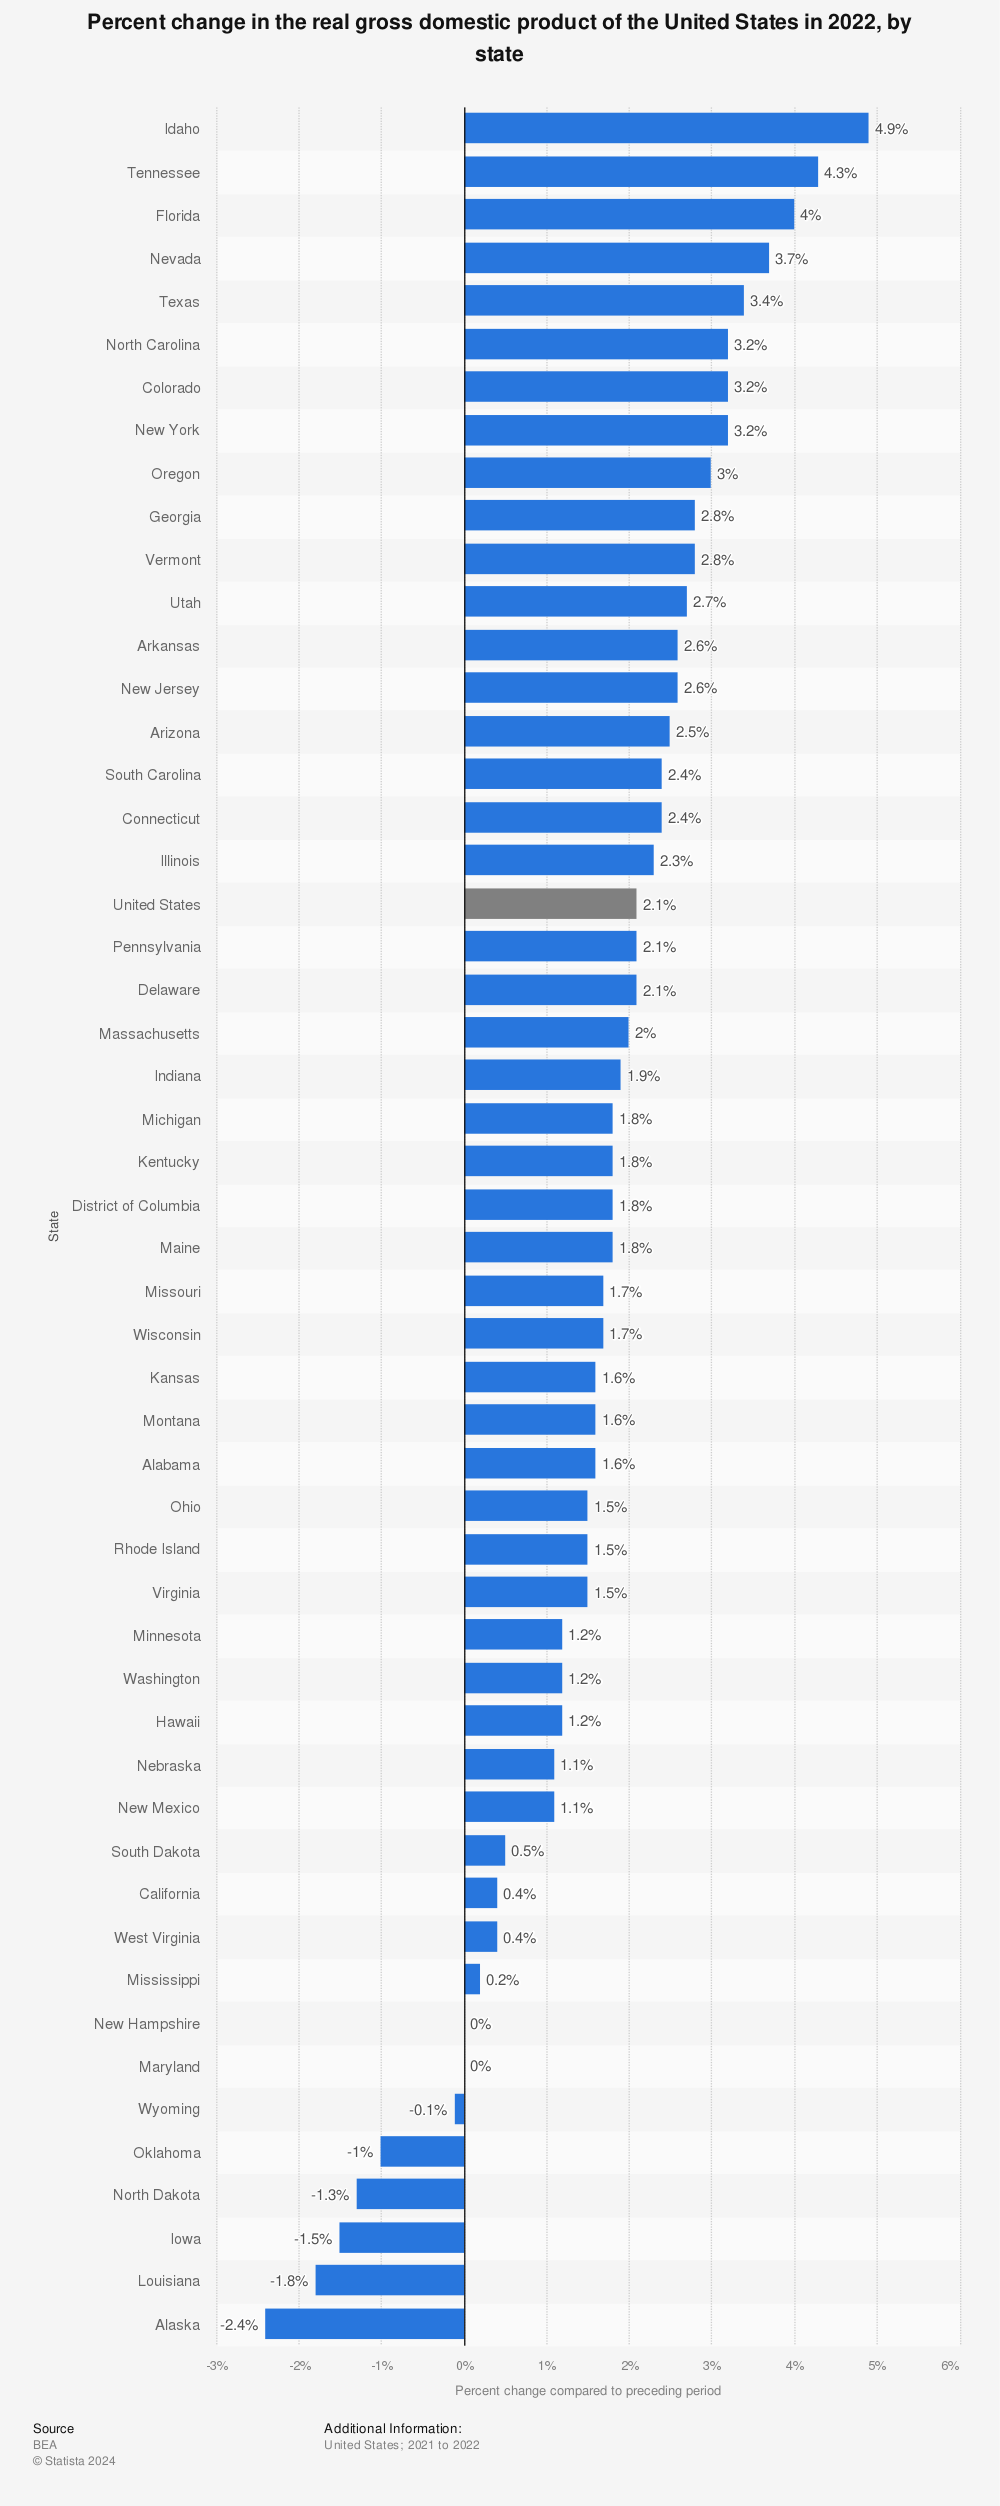 Statistic: Percent change in Real Gross Domestic Product (GDP) of the United States from preceding period in 2020, by state | Statista